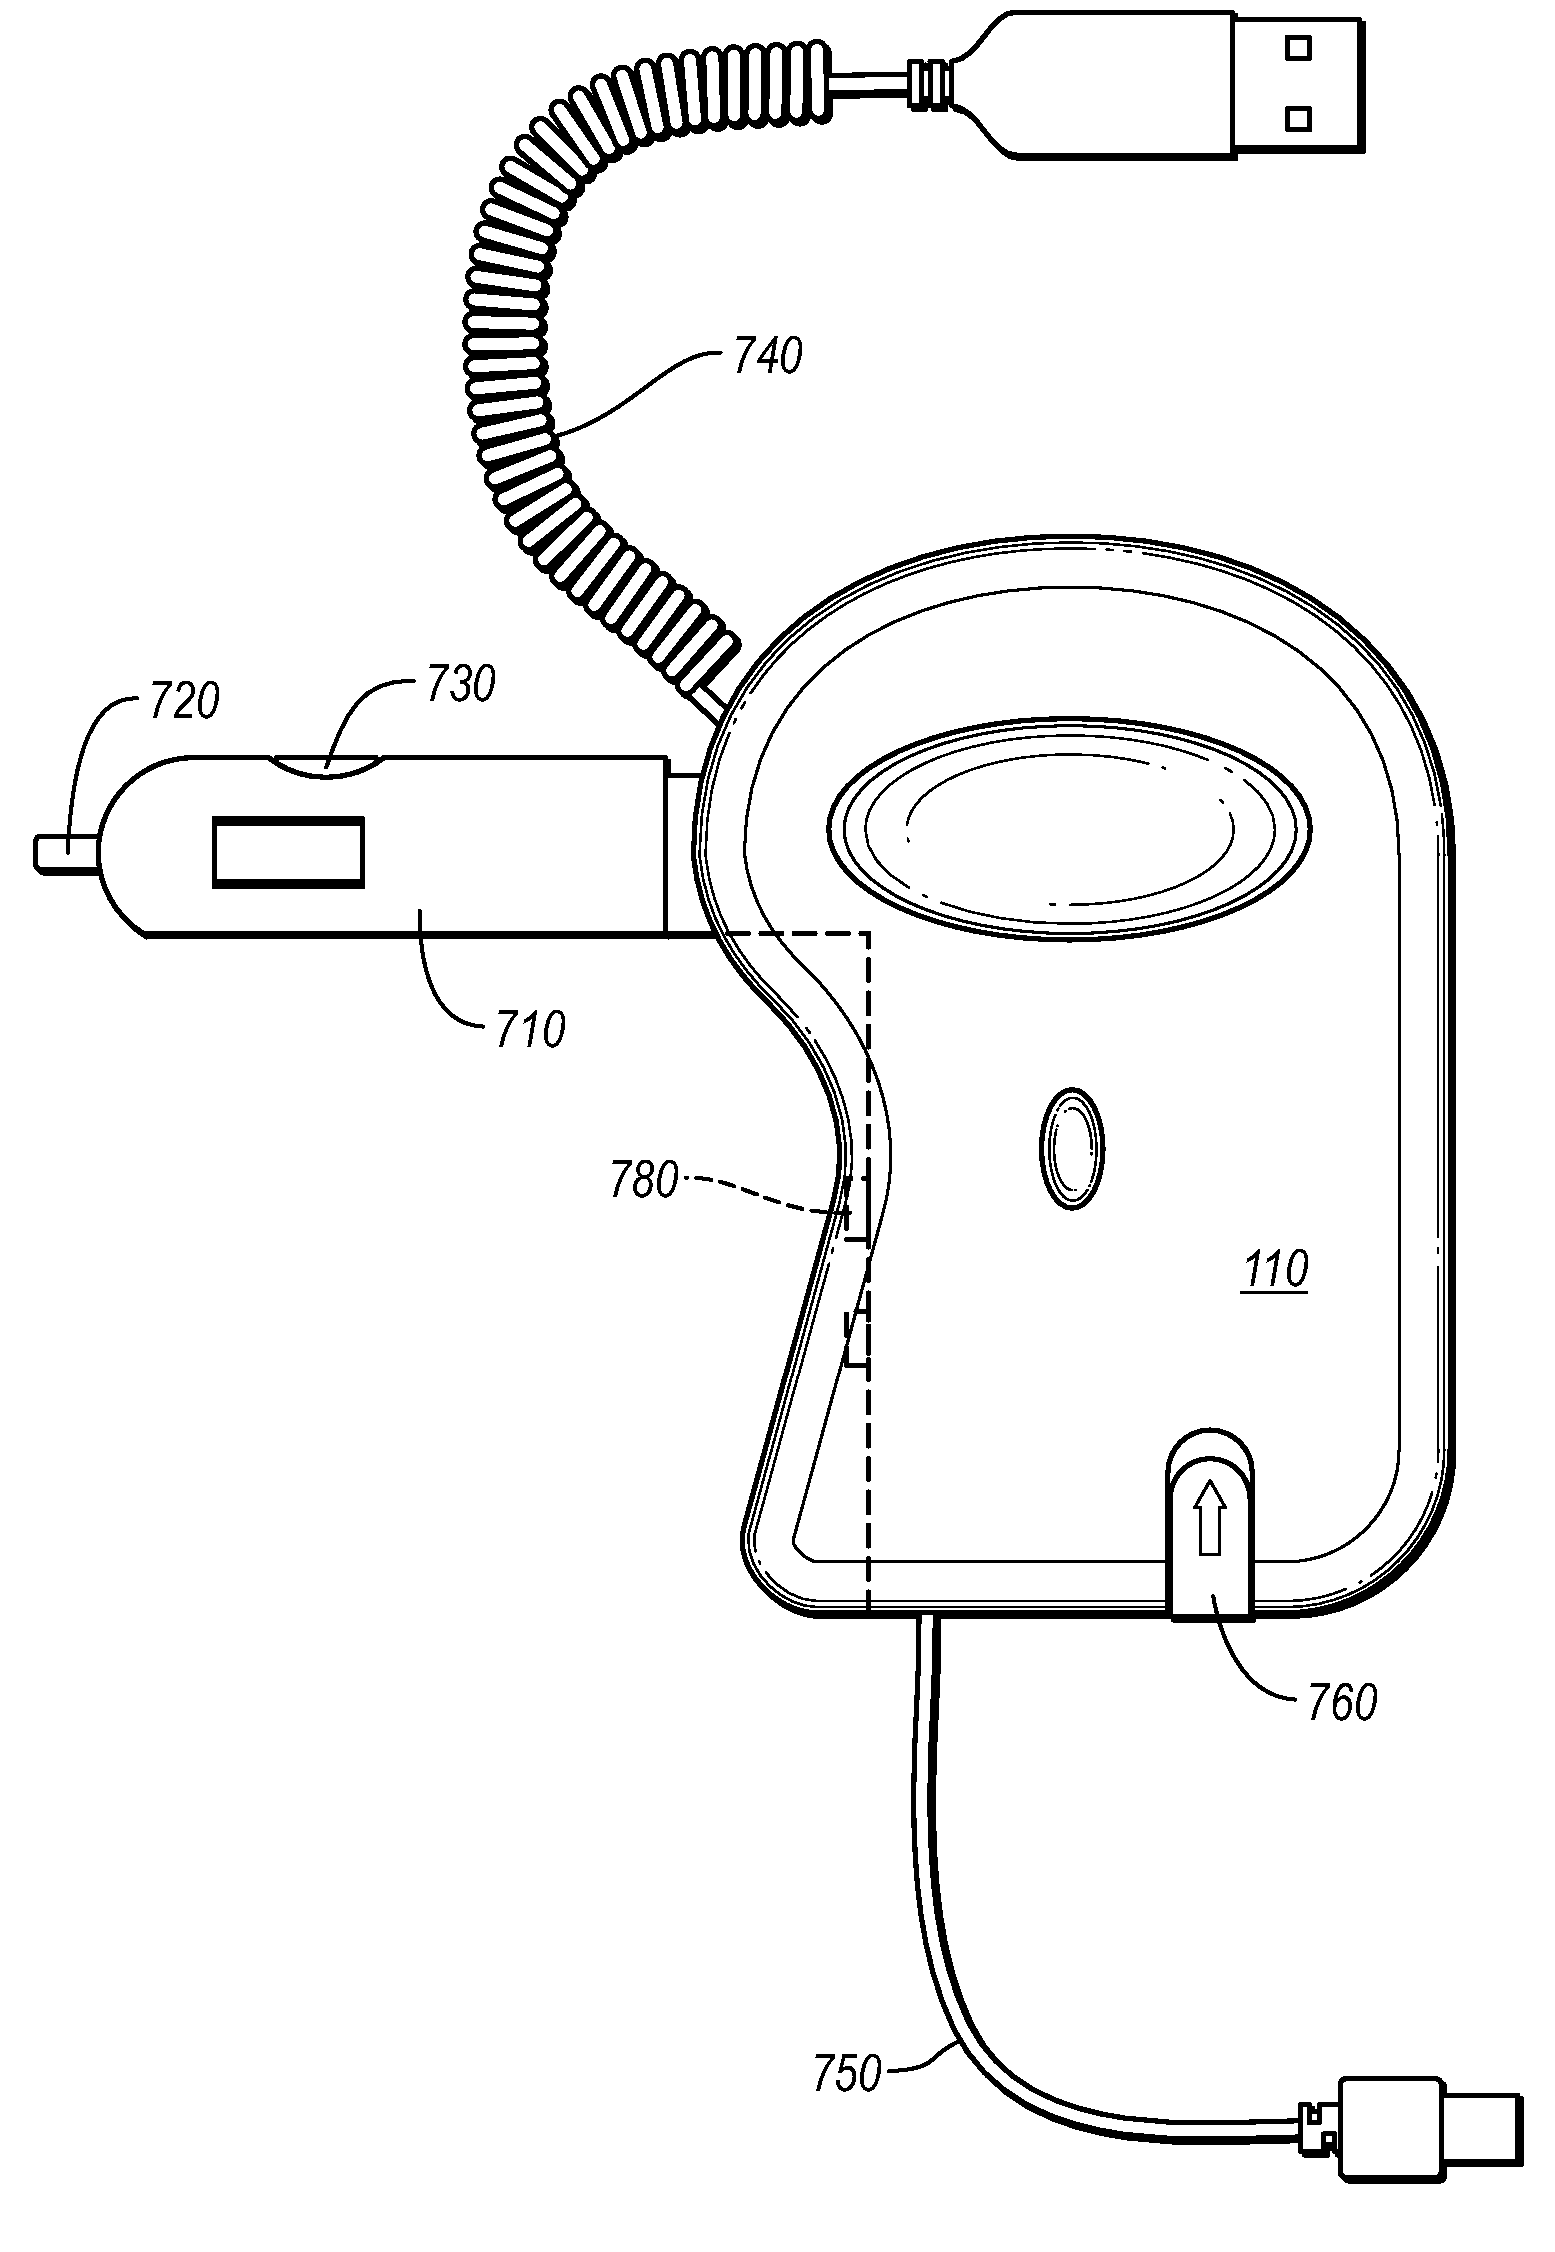 Systems and methods for powering an electronic device from selectable power sources